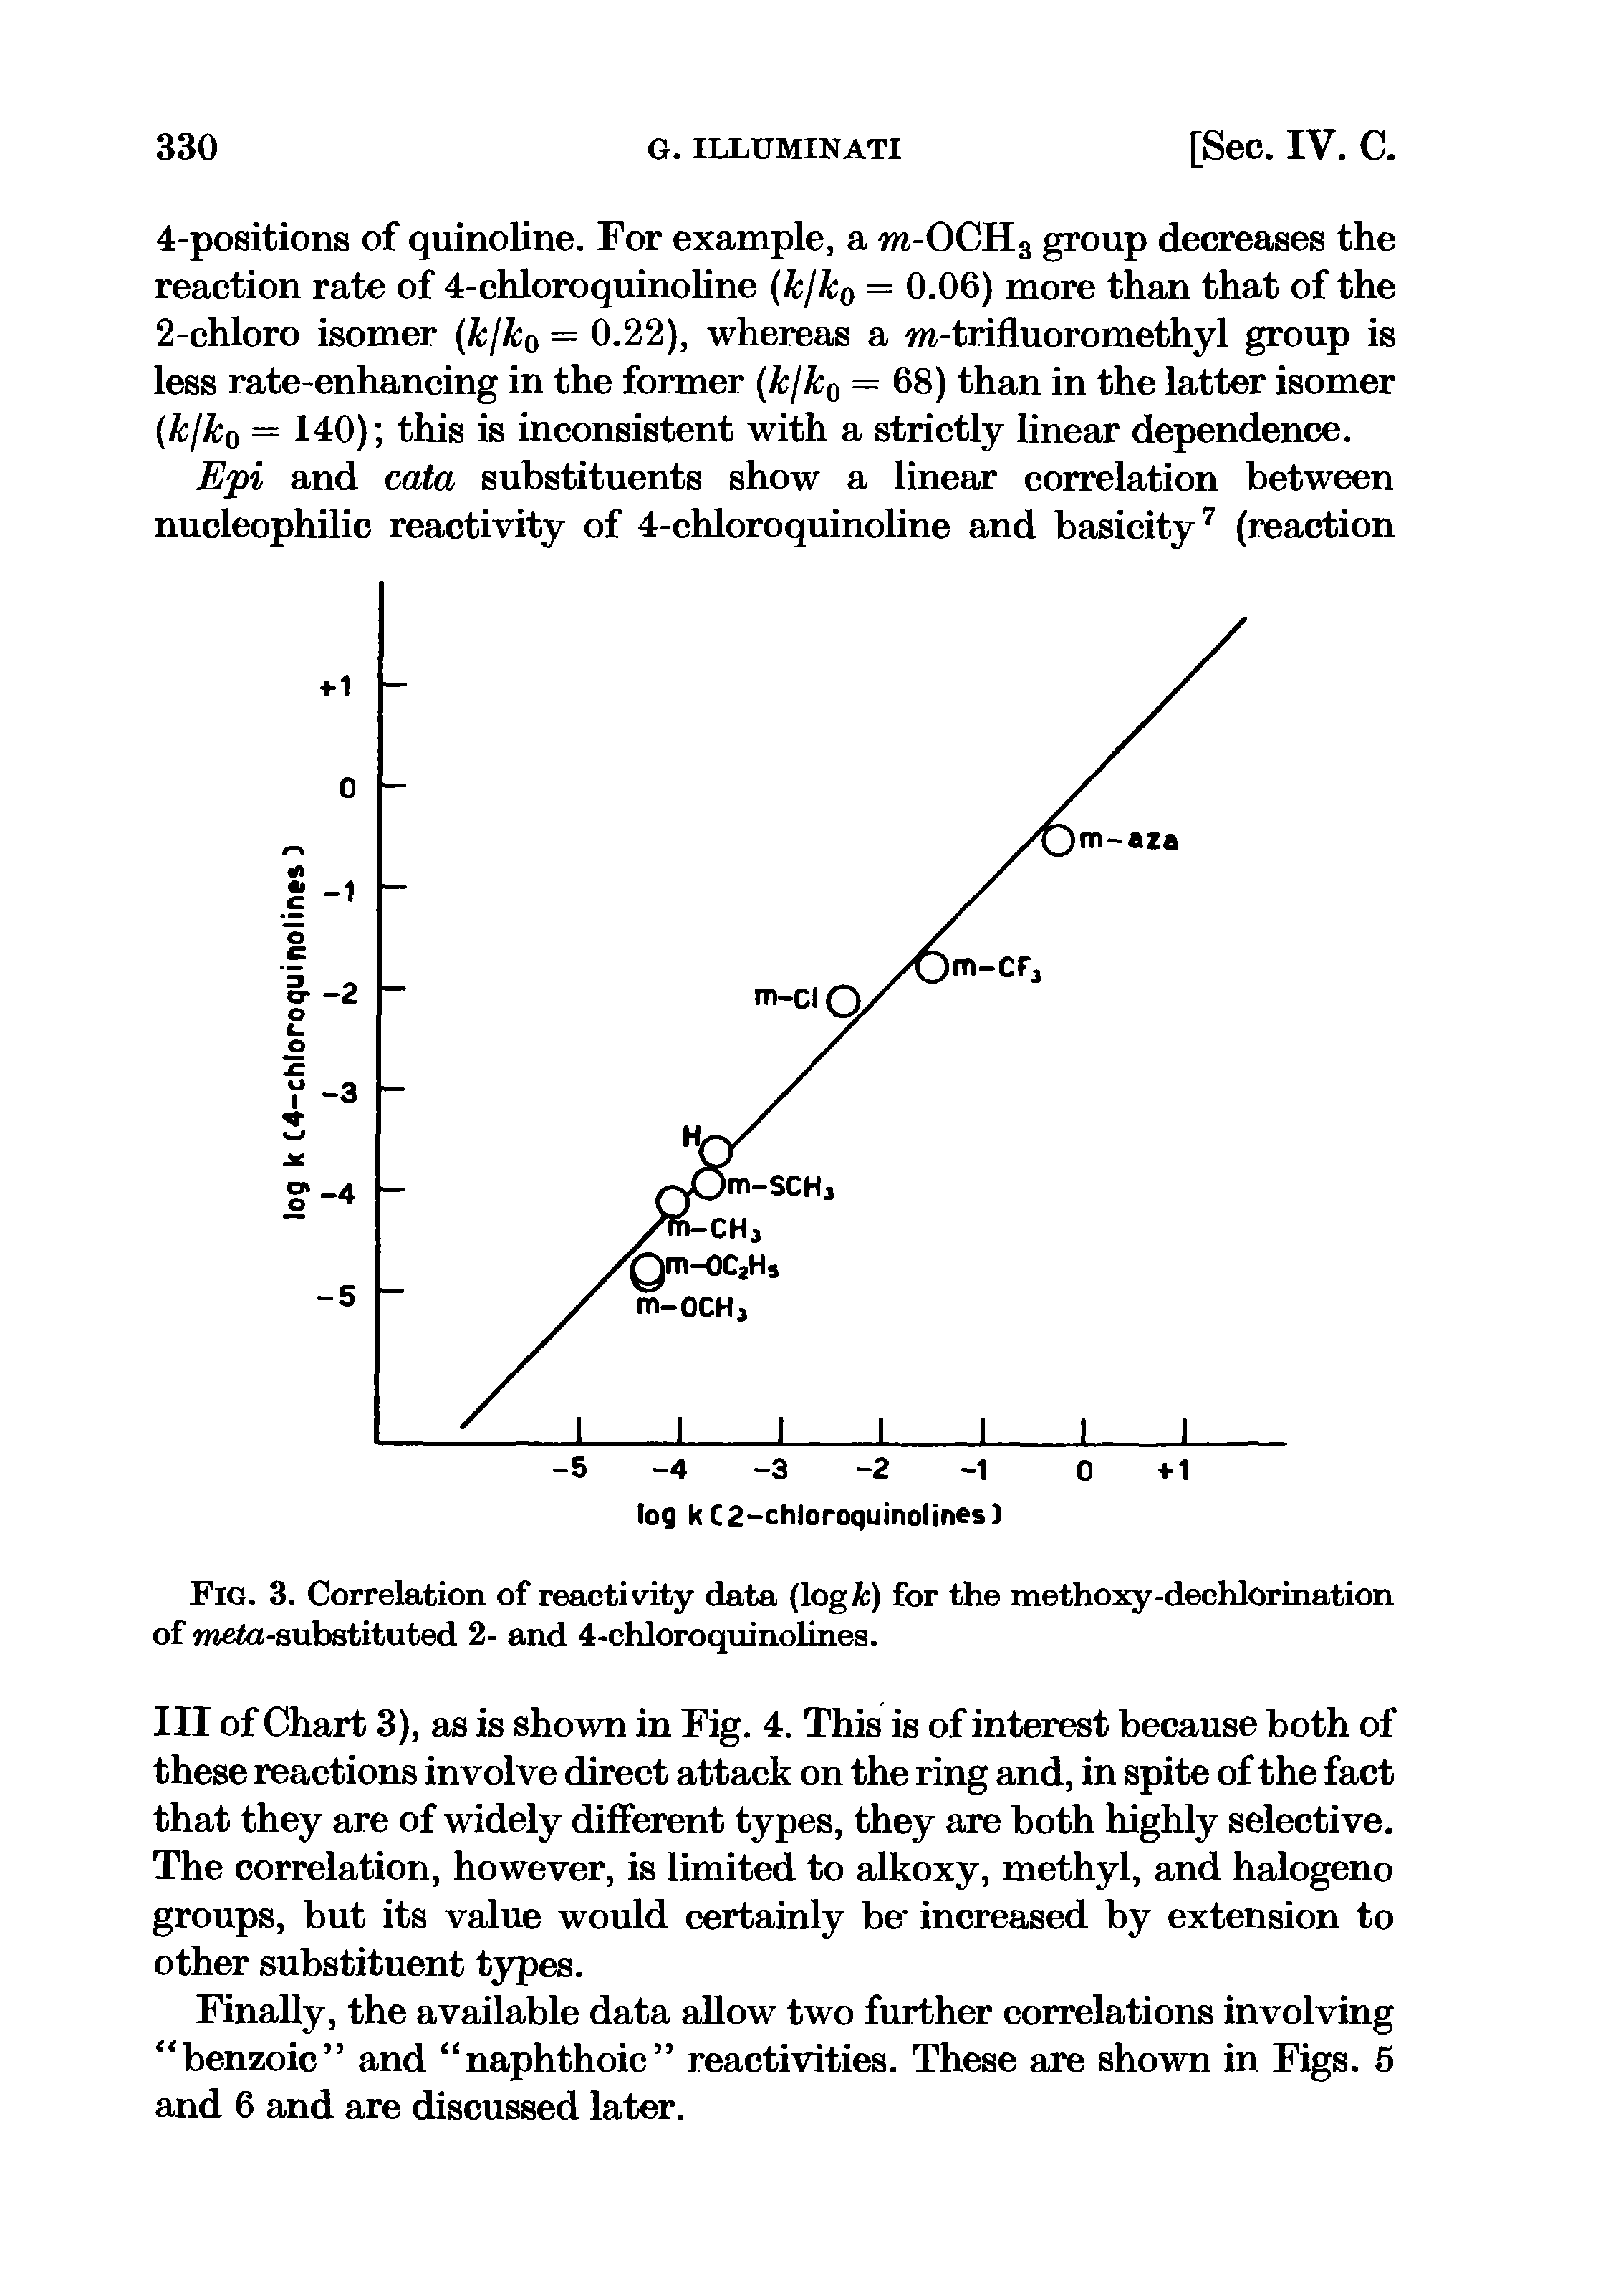 Fig. 3. Correlation of reactivity data (logfc) for the methoxy-dechlorination of meto-substituted 2- and 4-chloroquinolines.